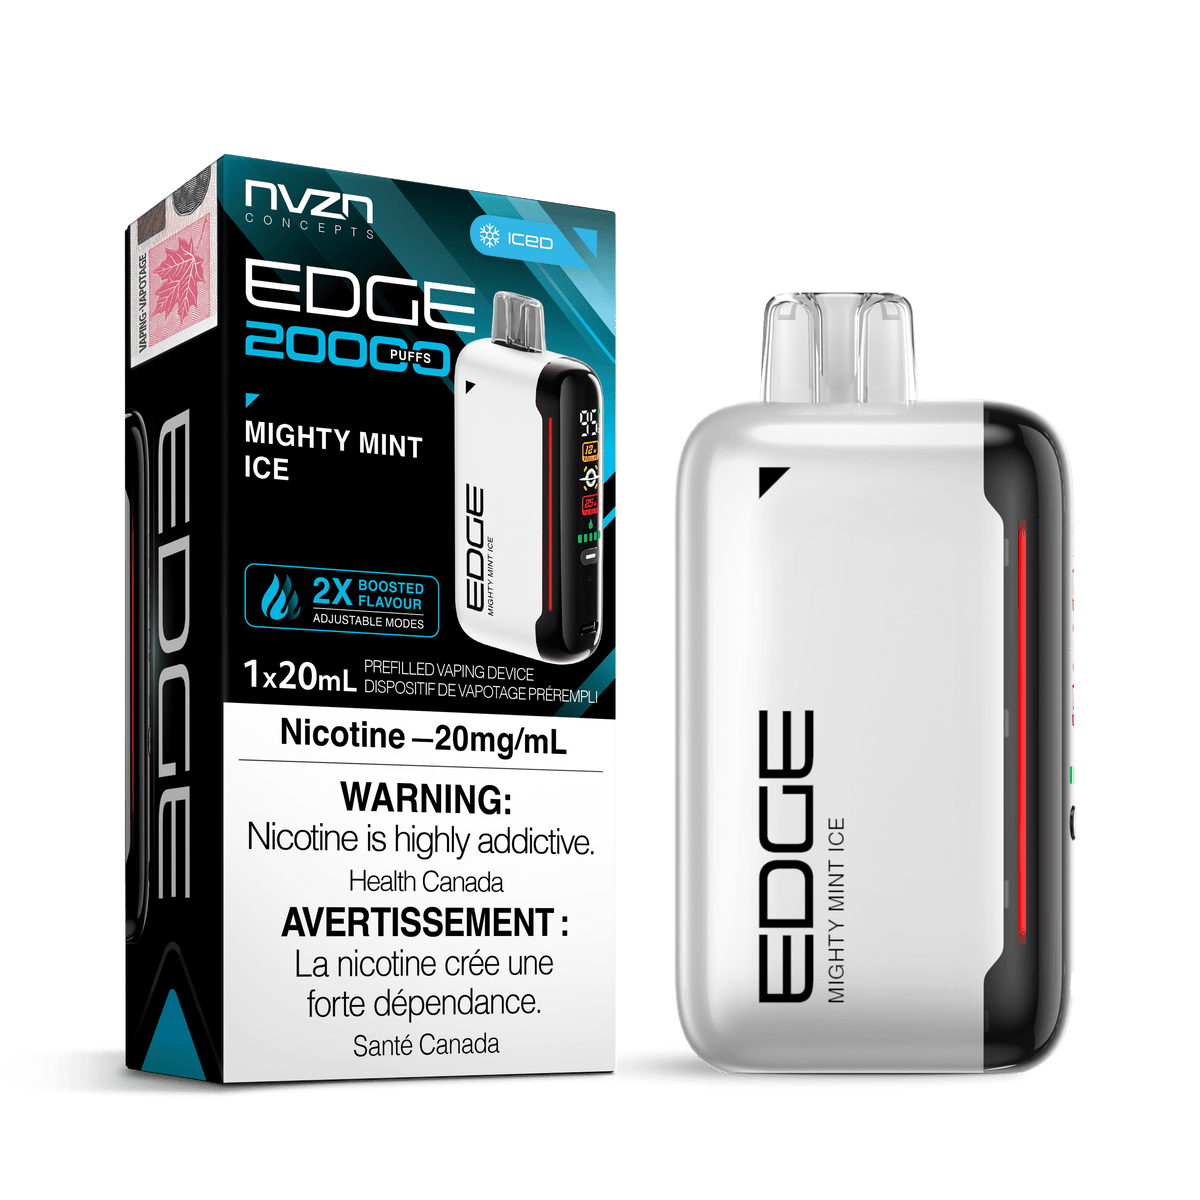 Edge By NVZN - Mighty Mint Ice Disposable Vape available on Canada online vape shop